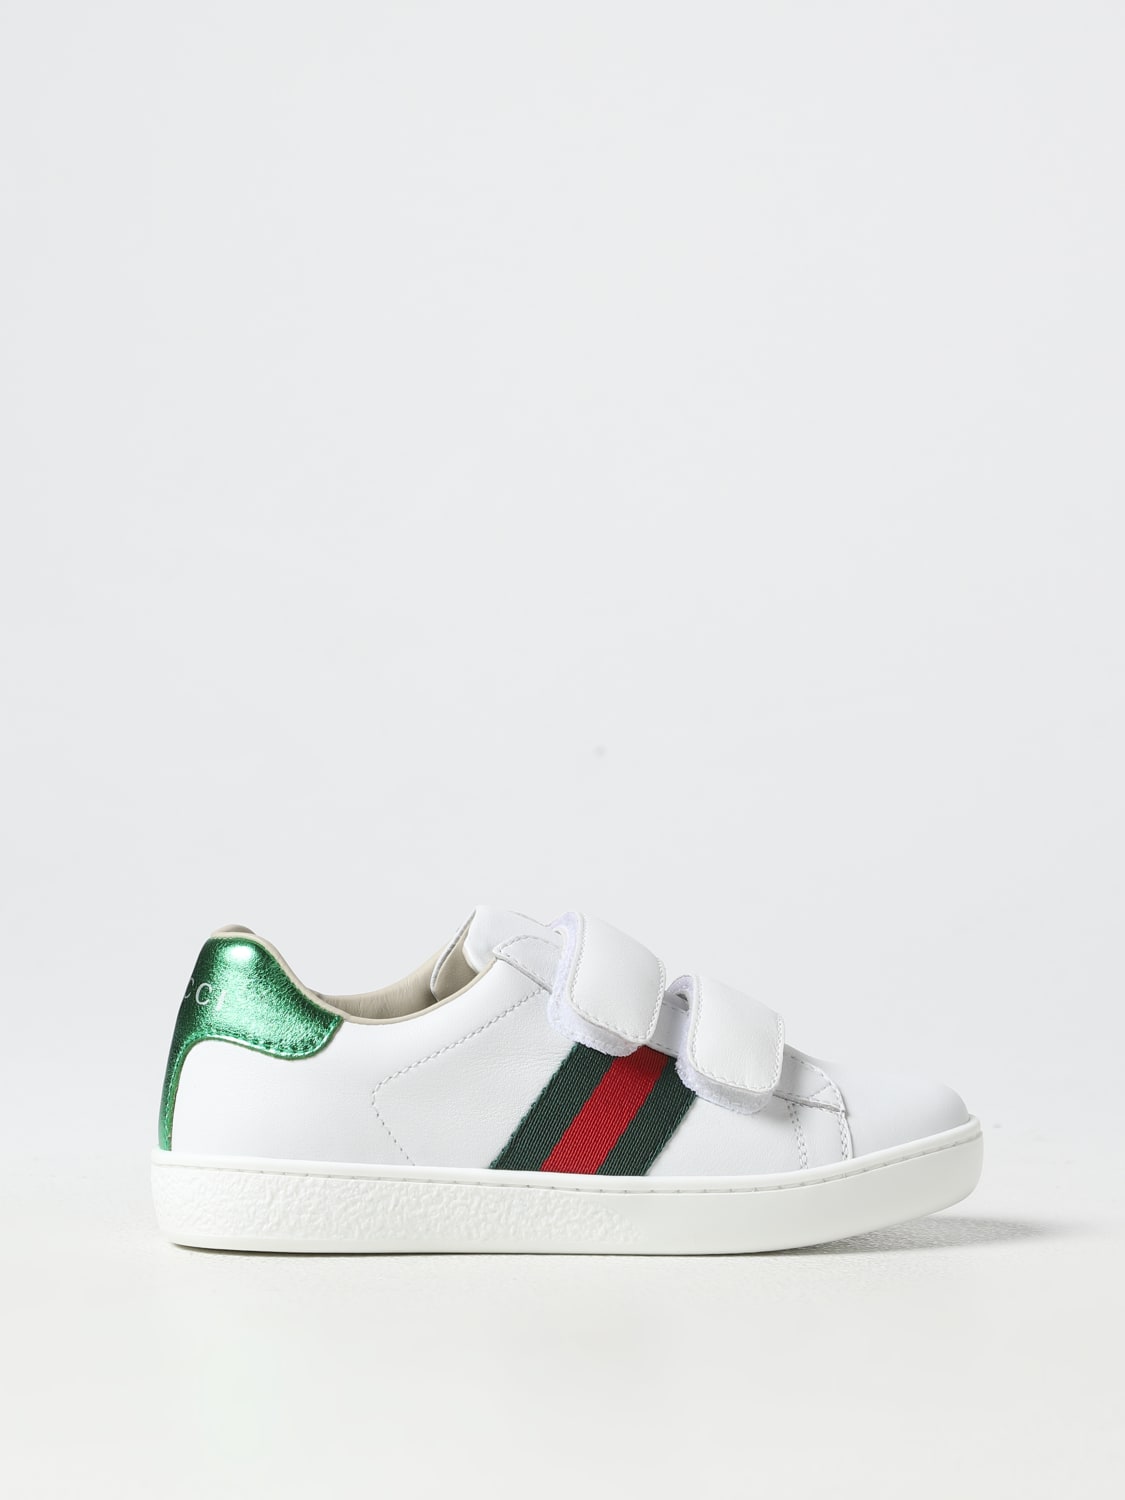 udvikling Autonomi Duplikere GUCCI: leather sneakers - White | Gucci sneakers 455448CPWP0 online at  GIGLIO.COM